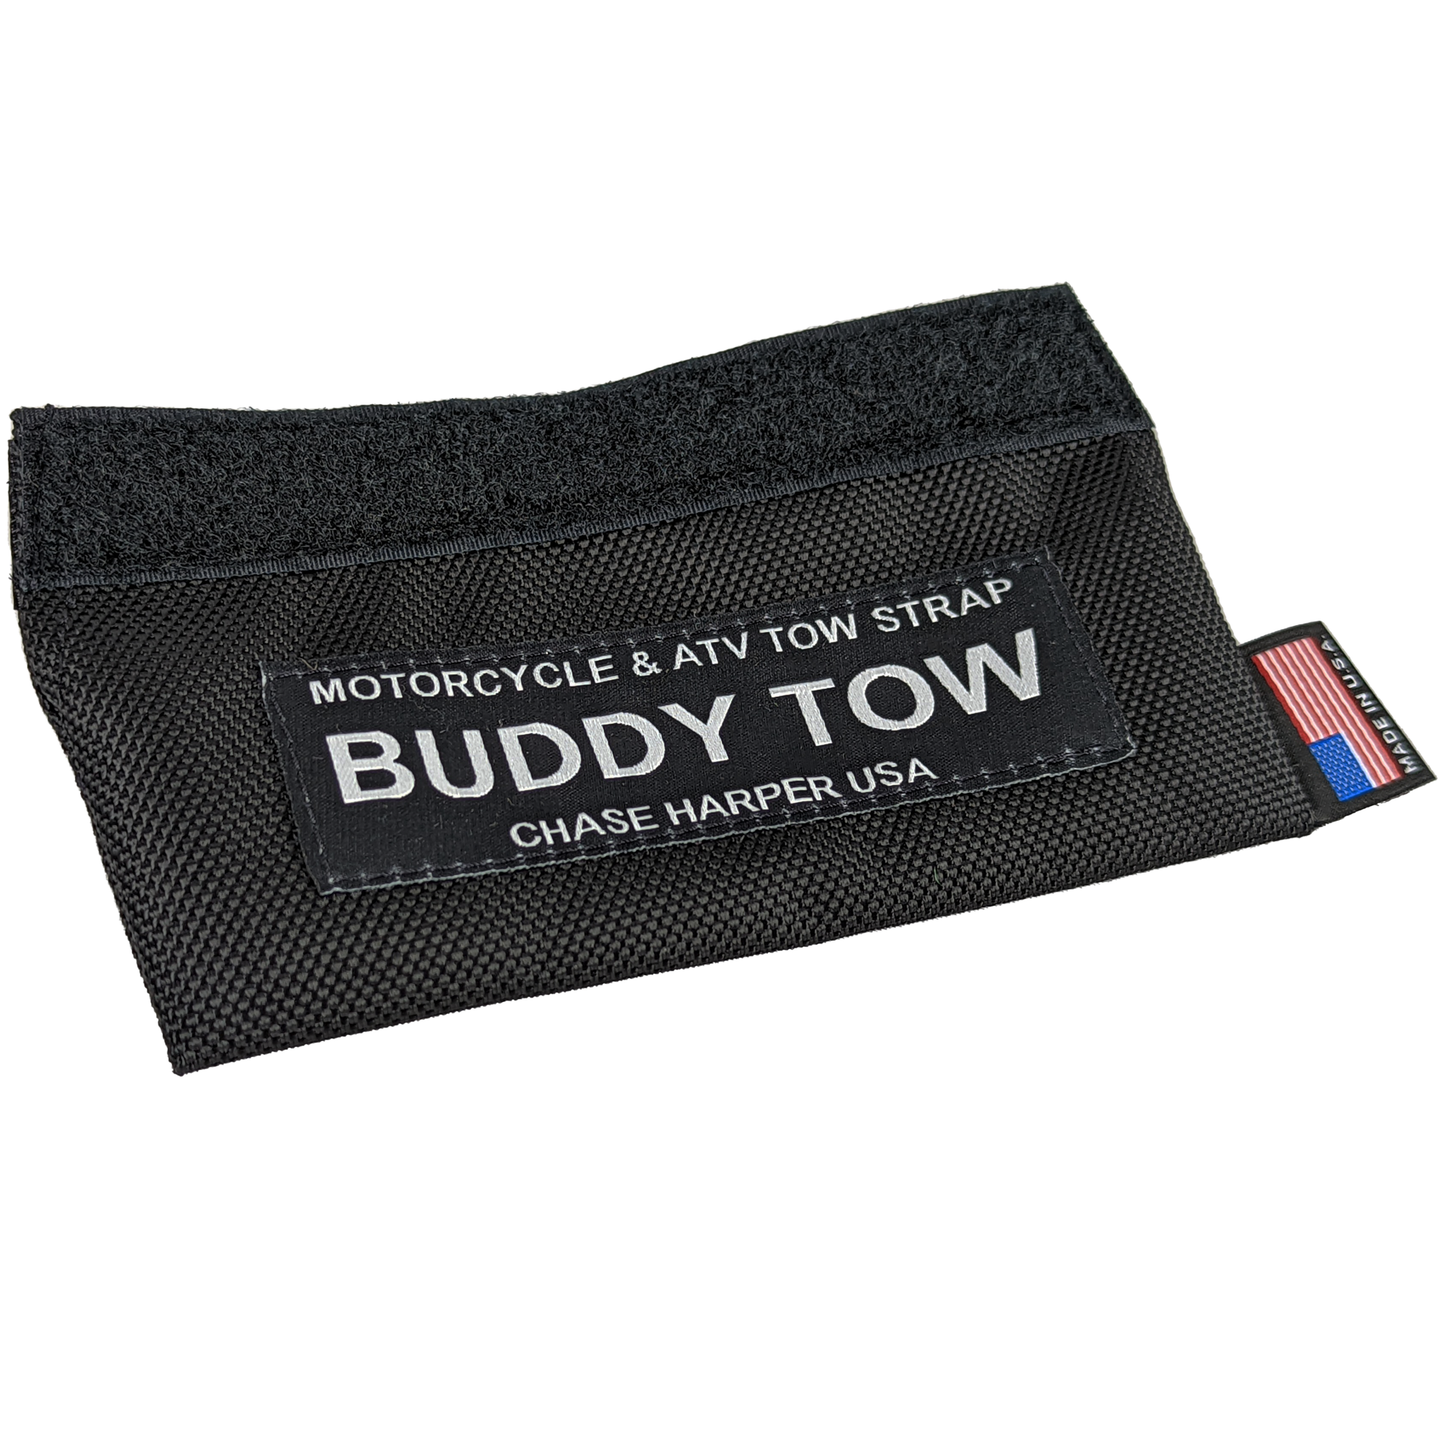 Buddy Tow Pouch (does not include tow strap)